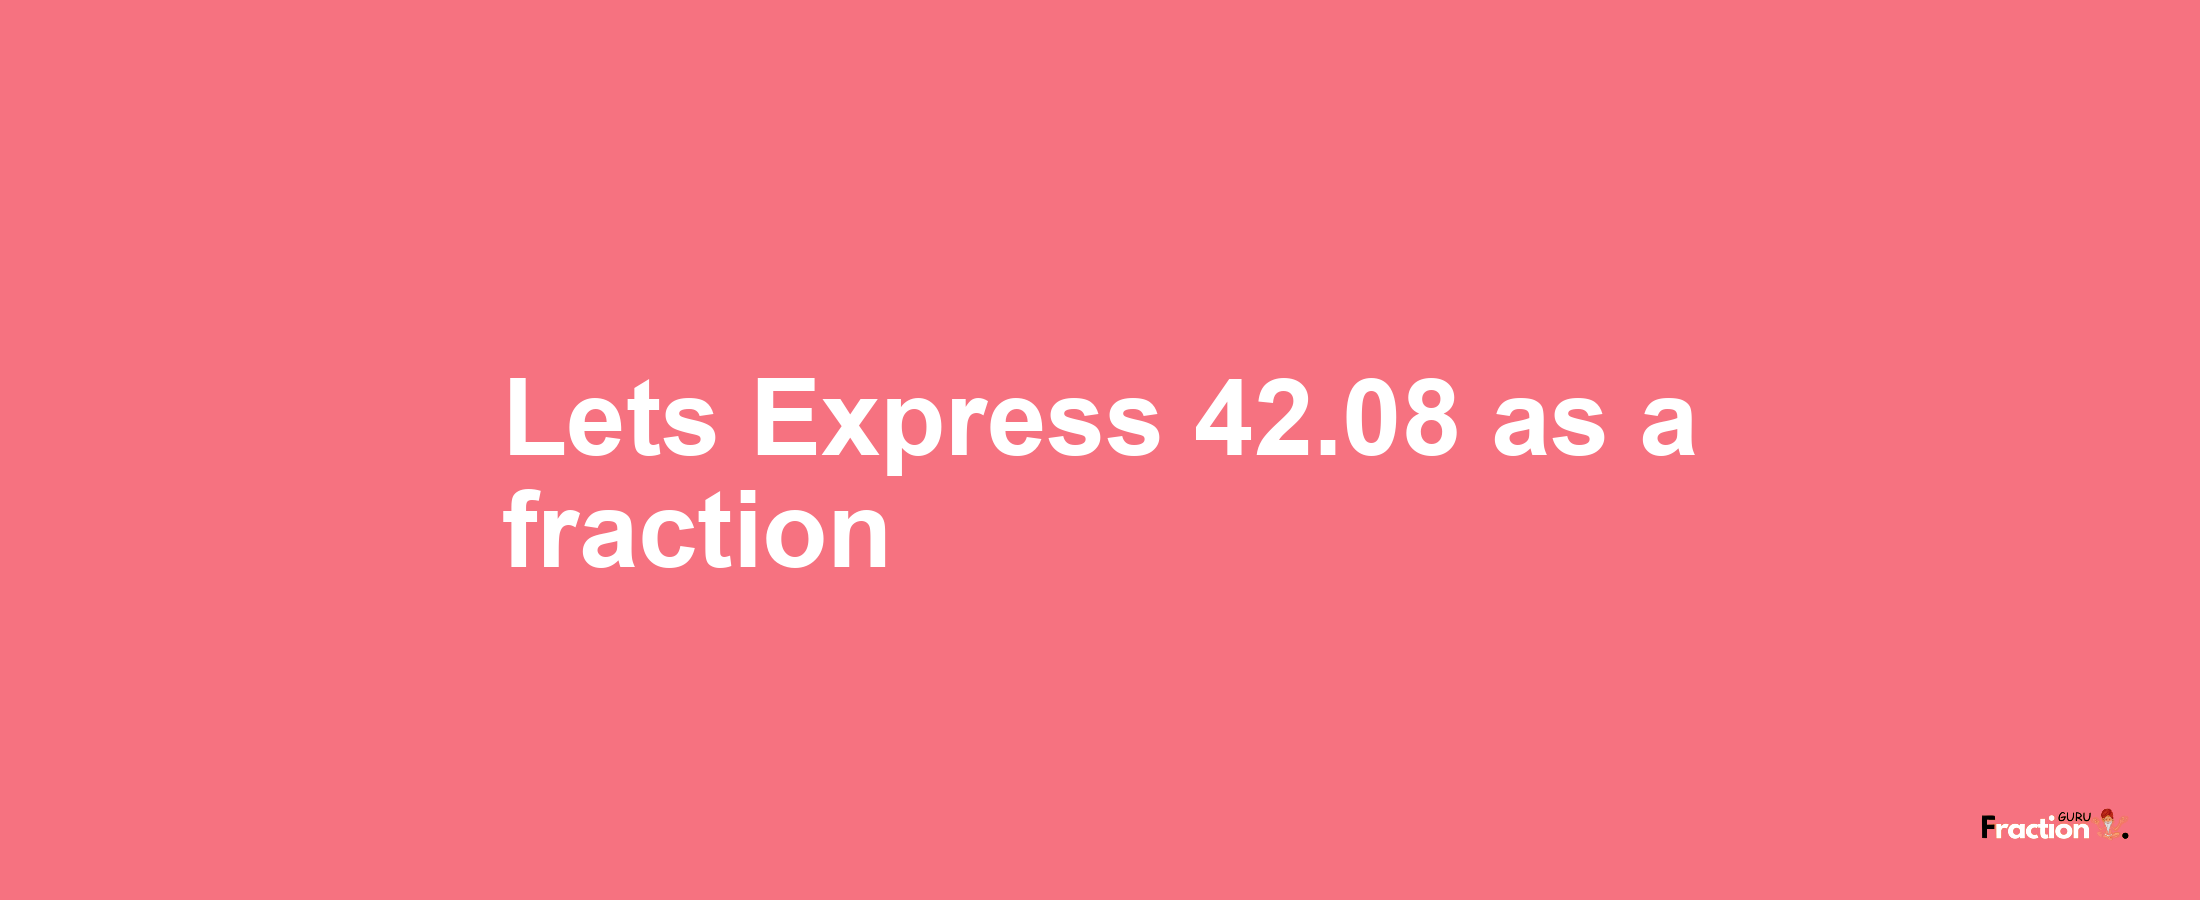 Lets Express 42.08 as afraction